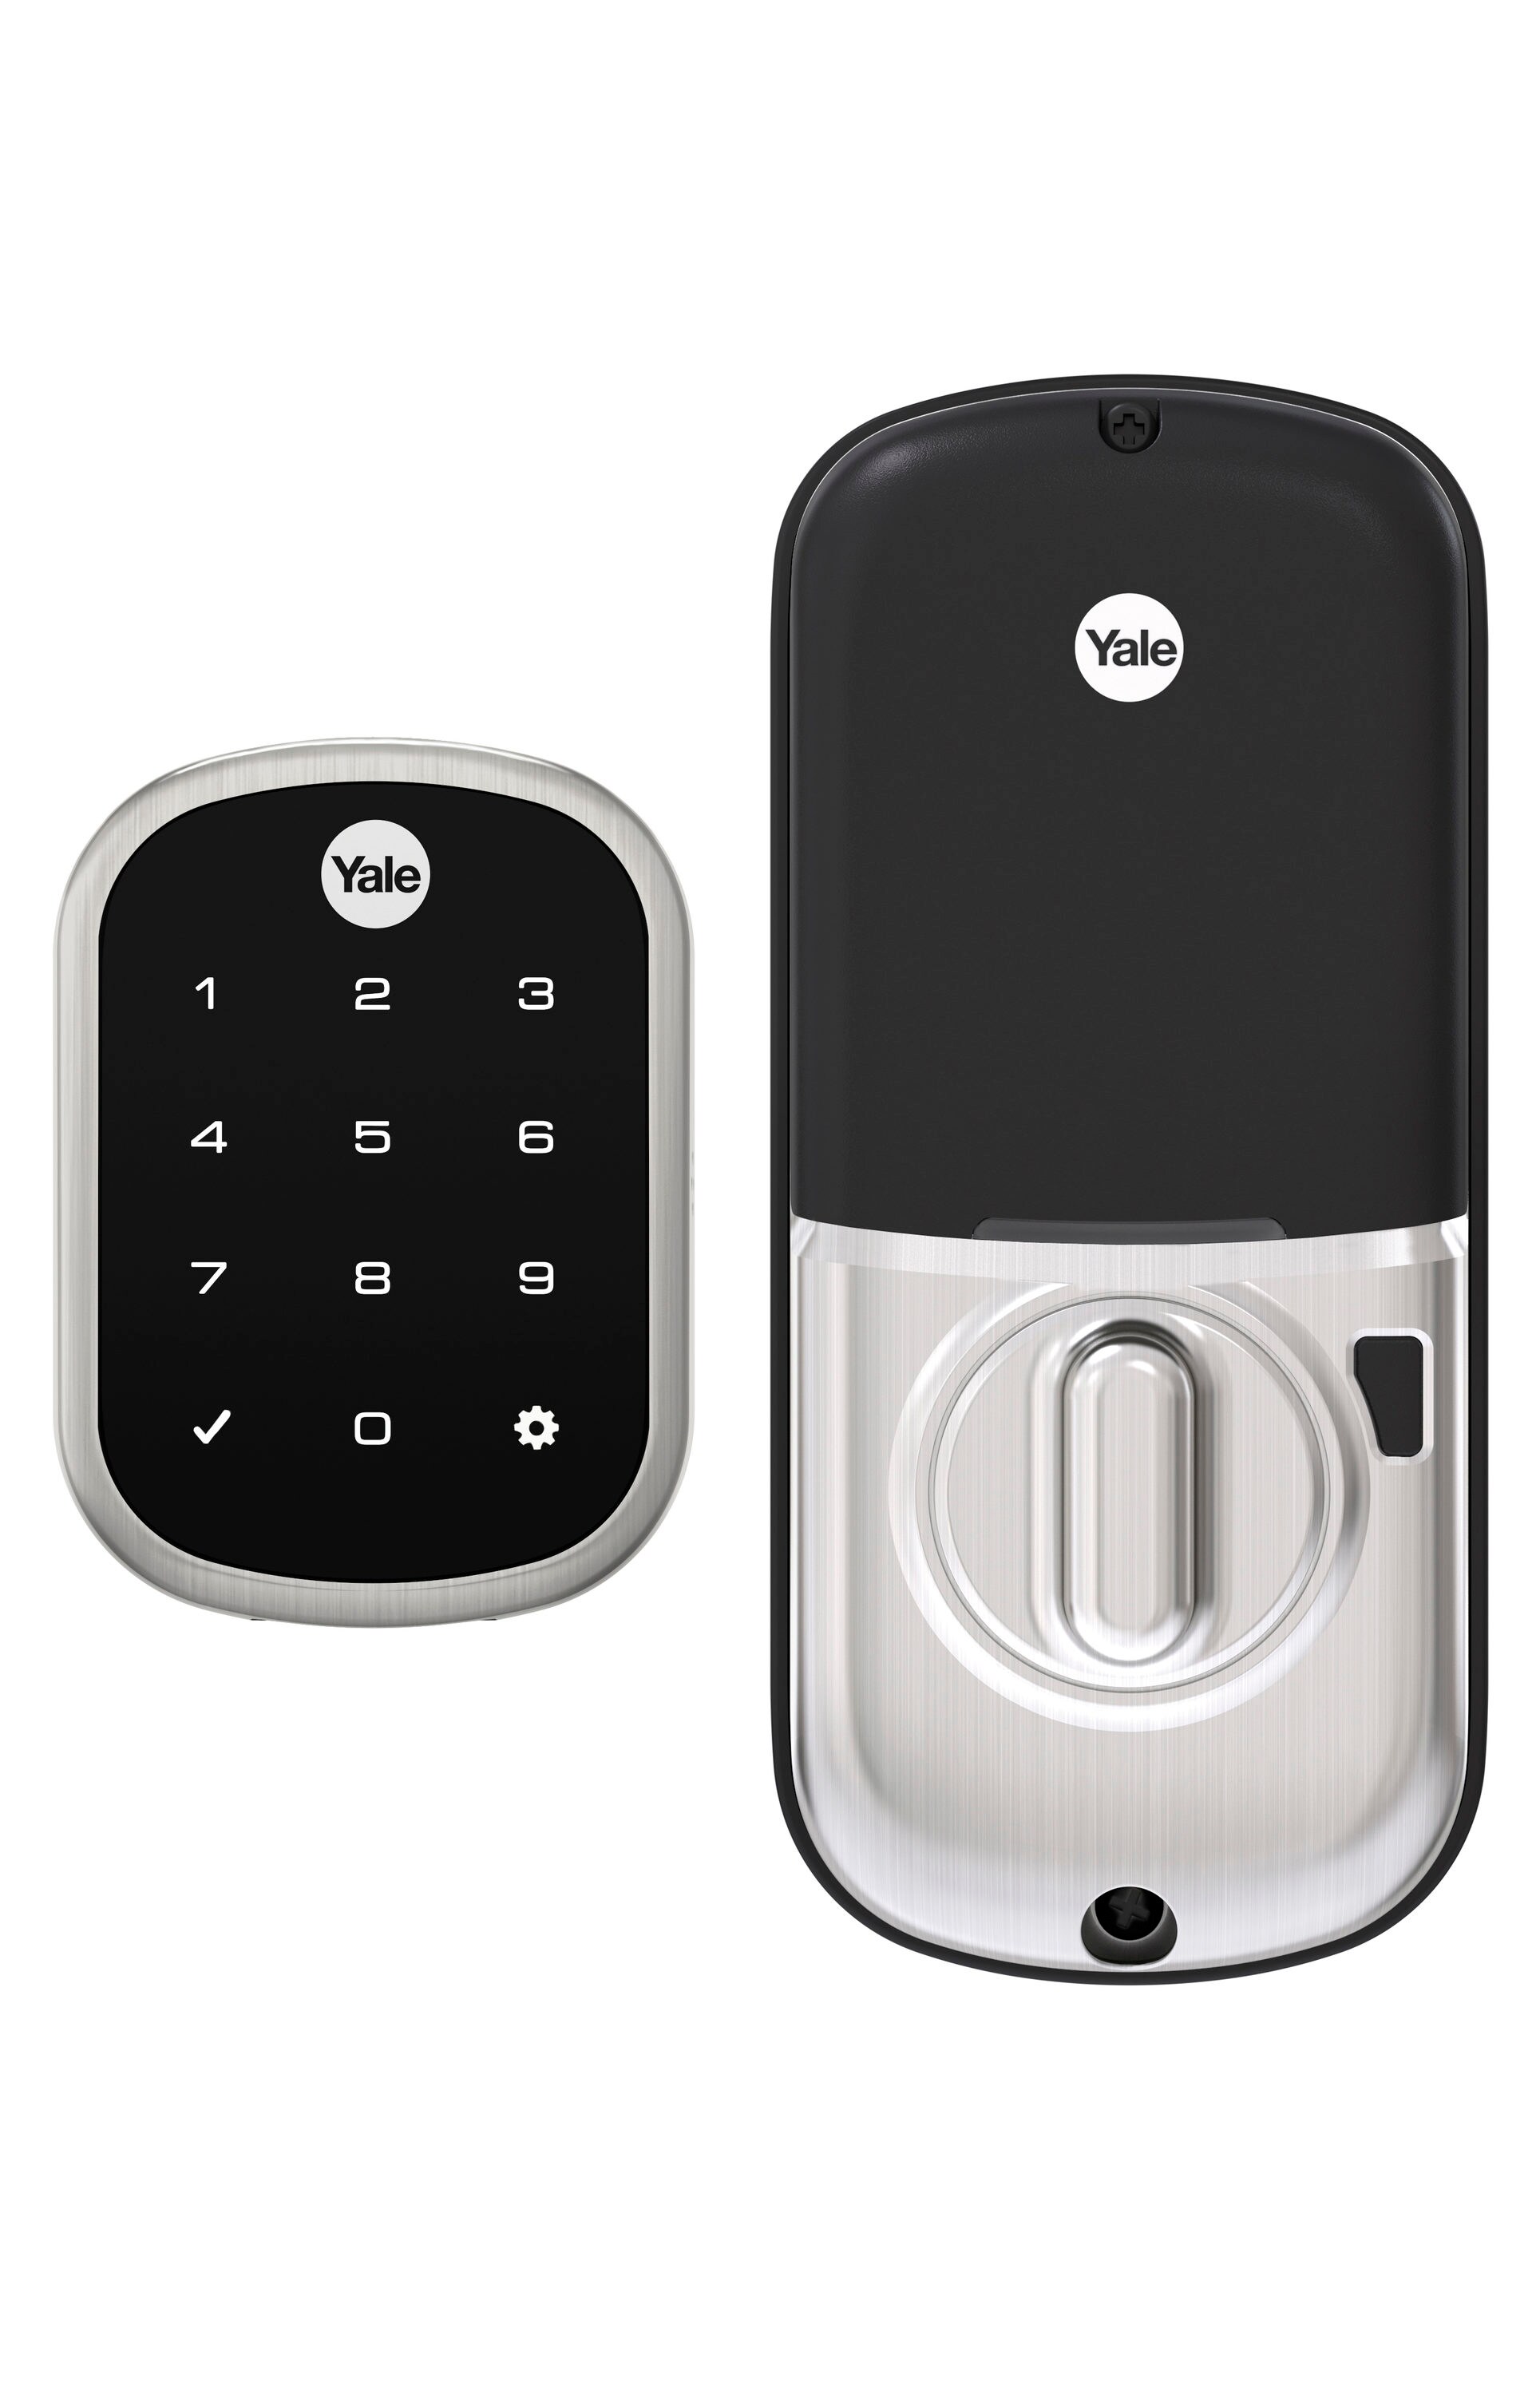 Photo 1 of ****UNABLE TO TEST****
Yale Security Assure Lock SL Deadbolt Satin Nickel Us15 Electronic Deadbolt Lighted Keypad Touchscreen